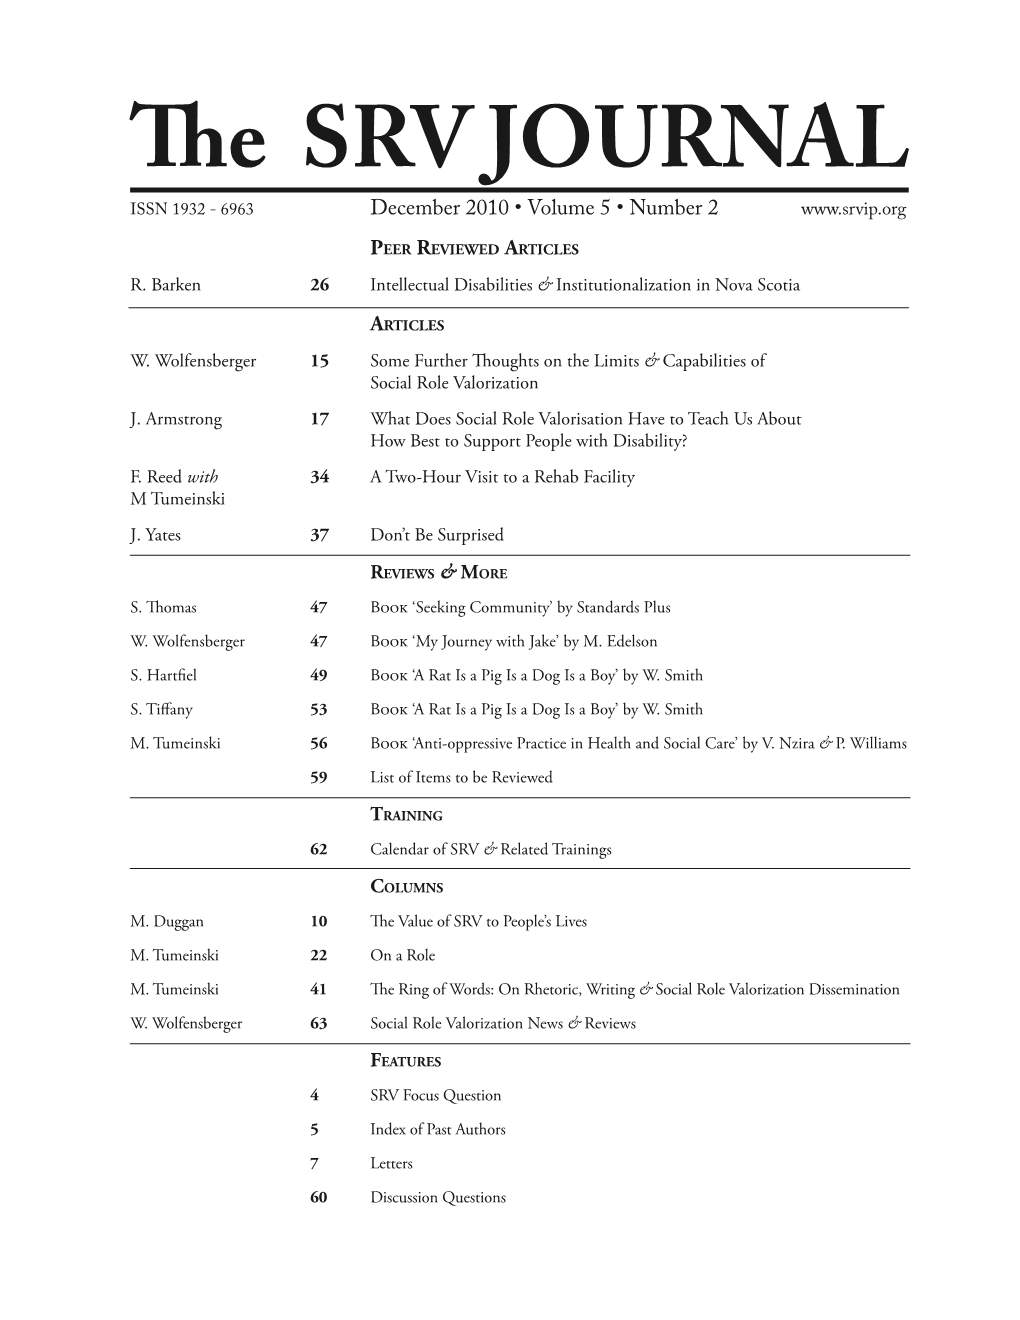 The SRV JOURNAL from the EDITOR